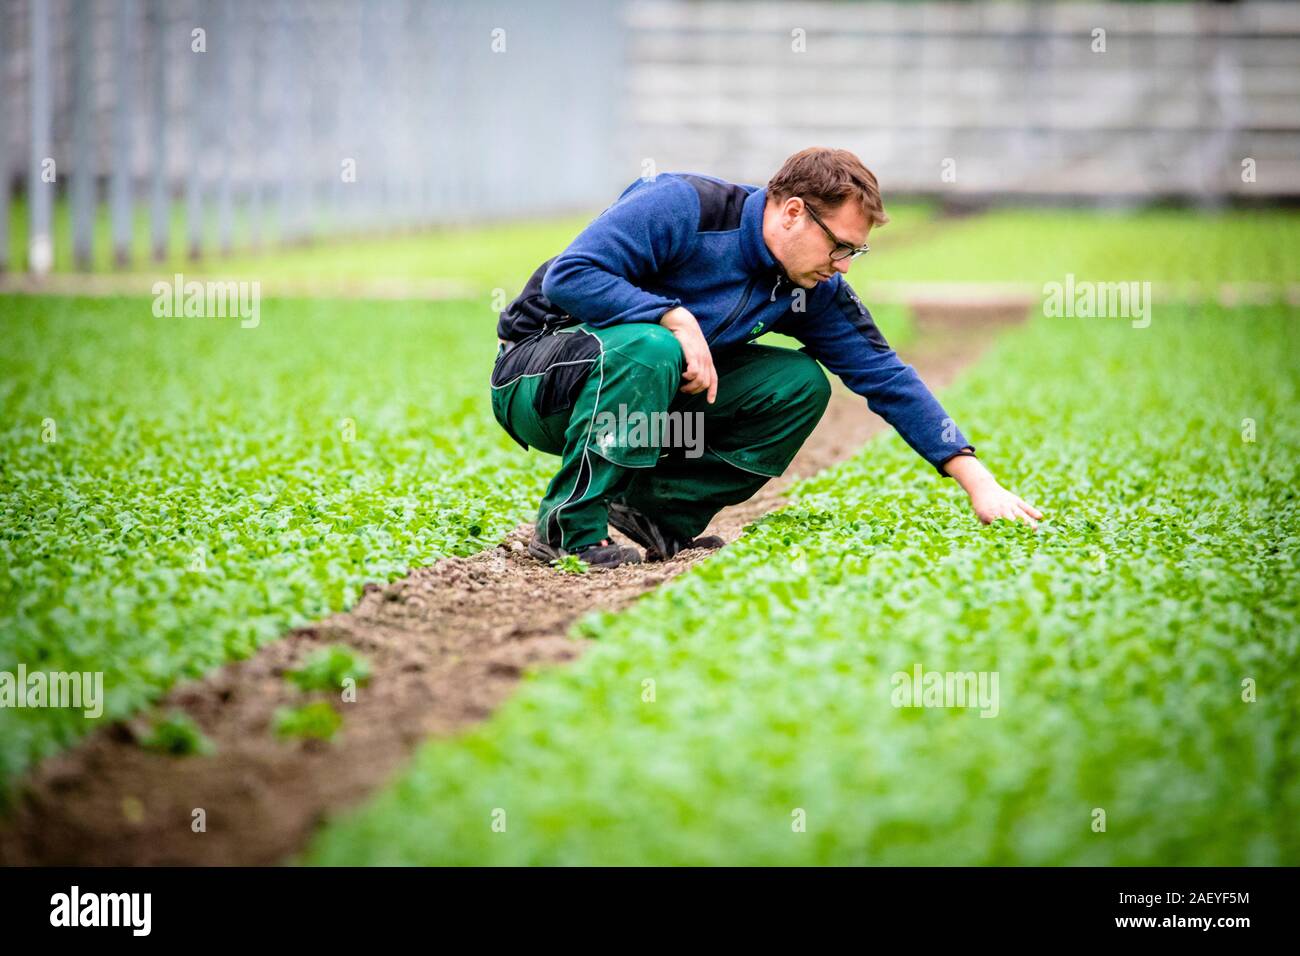 Greenhouse Manager Paul Ruser tend to sallad plants at the Gebr. Meier Greenhouse in Hinwil outside Zurich. Commercial greenhouses utilize tecnhical CO2 to increase the crop yield. Traditionally the CO2 production is done with burning fossil fuels, but the Meier Greenhouse get their CO2 locally the Swiss company Climeworks. Founded in 2009 by Christoph Gebald and Jan Wurzbacher, the company has commercialized the modular carbon capture unit, each of which is capable of sucking up to 135 kilo of CO2 out of the air daily. The CO2 collectors use excess energy from the Kezo Waste Incinerator to ru Stock Photo